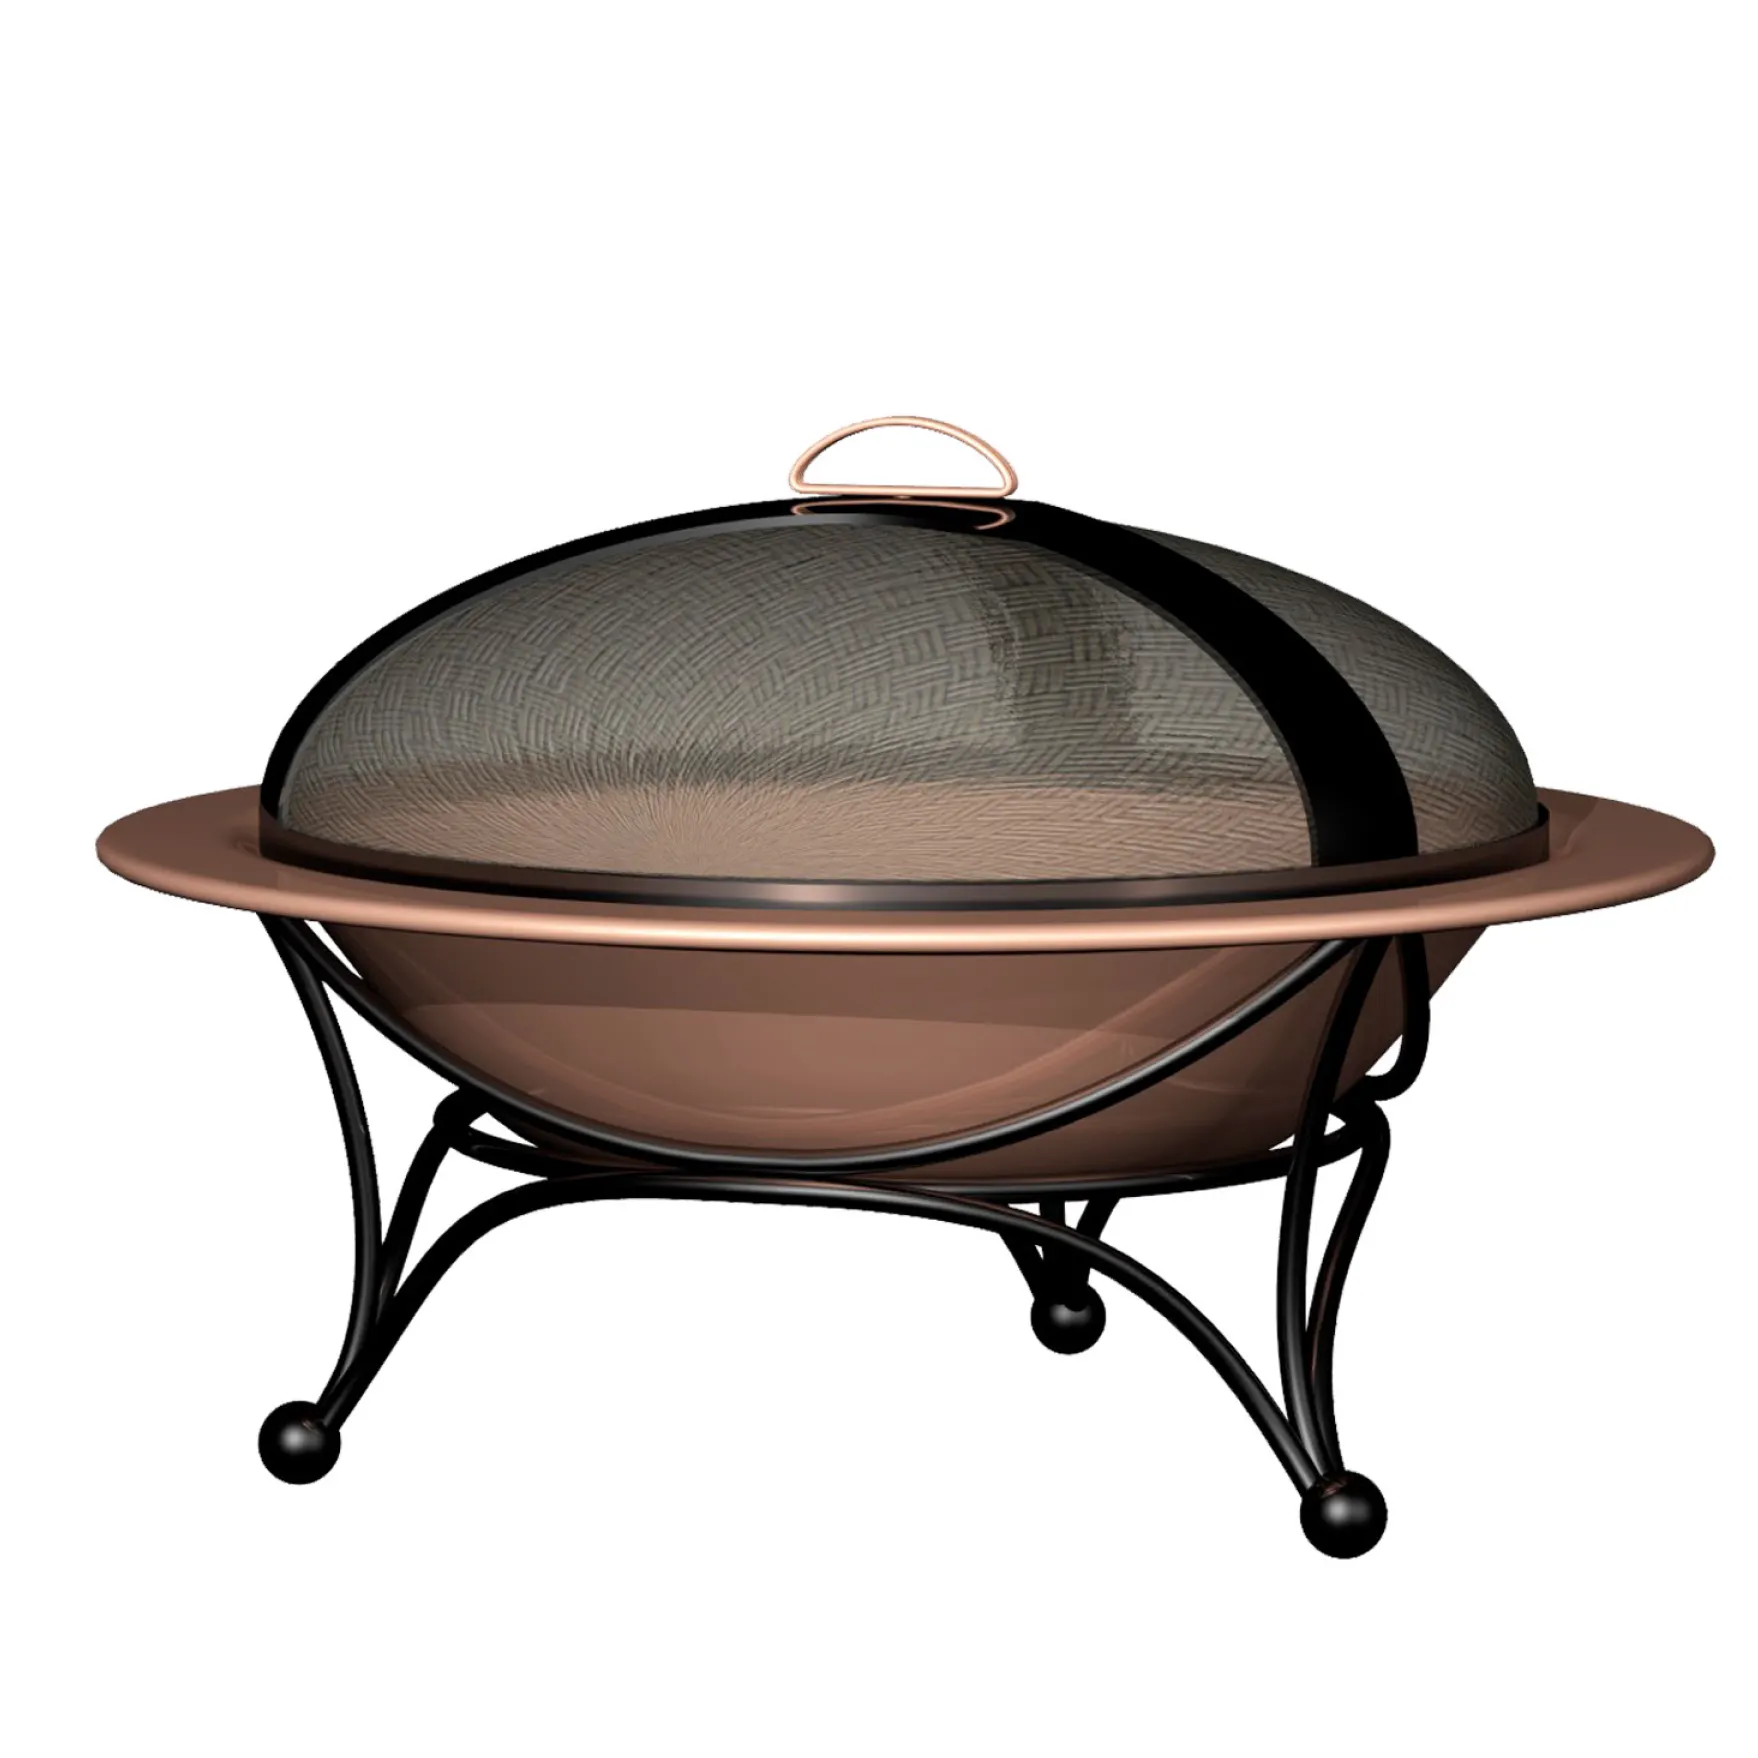 2021 Outdoor Garden Patio Tripod Camping Metal Fire Bowl Round Wood Burning Fire Pit For Heating And Barcecue